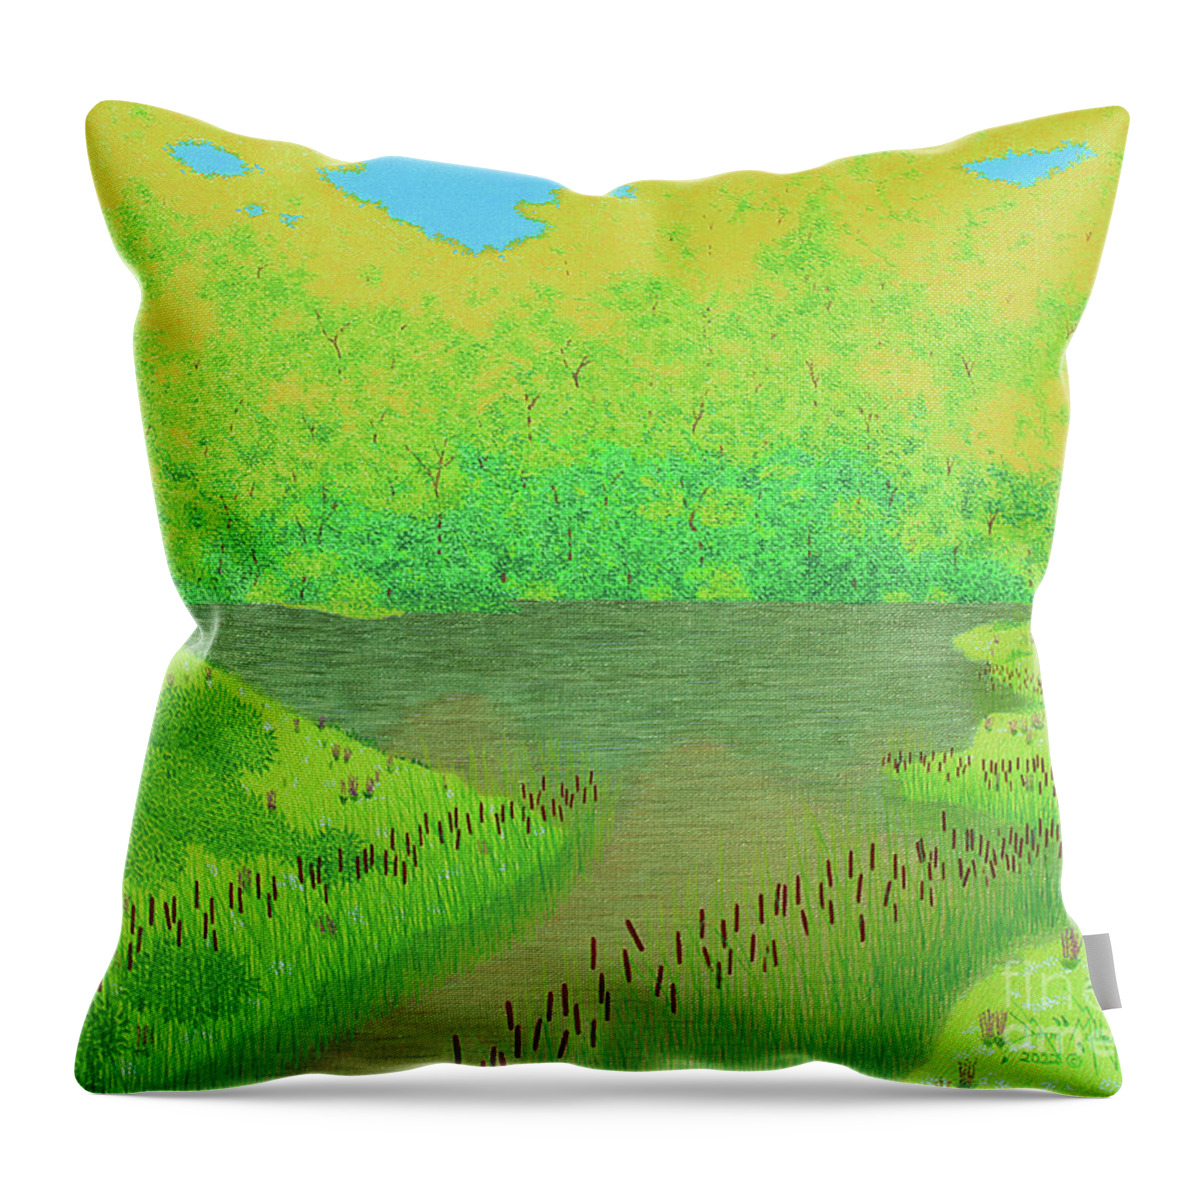 Streams Throw Pillow featuring the painting Look On The Bright Side by Doug Miller